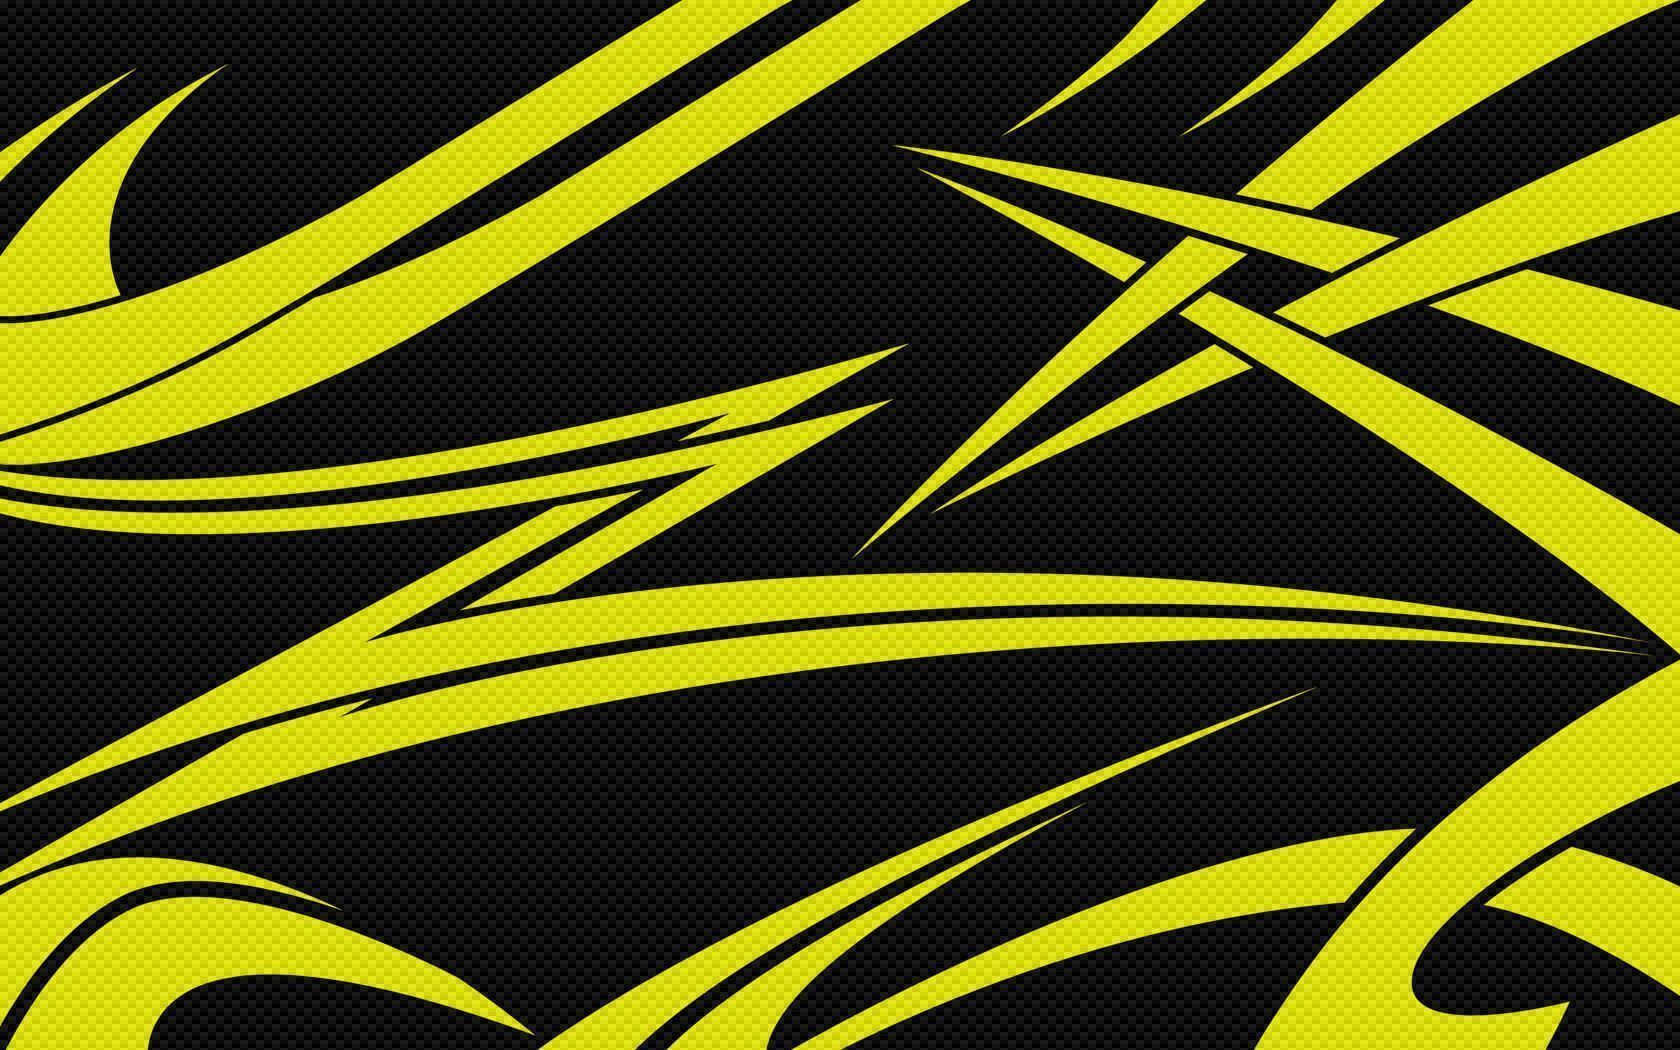 1300x863px 258.6 KB Black And Yellow